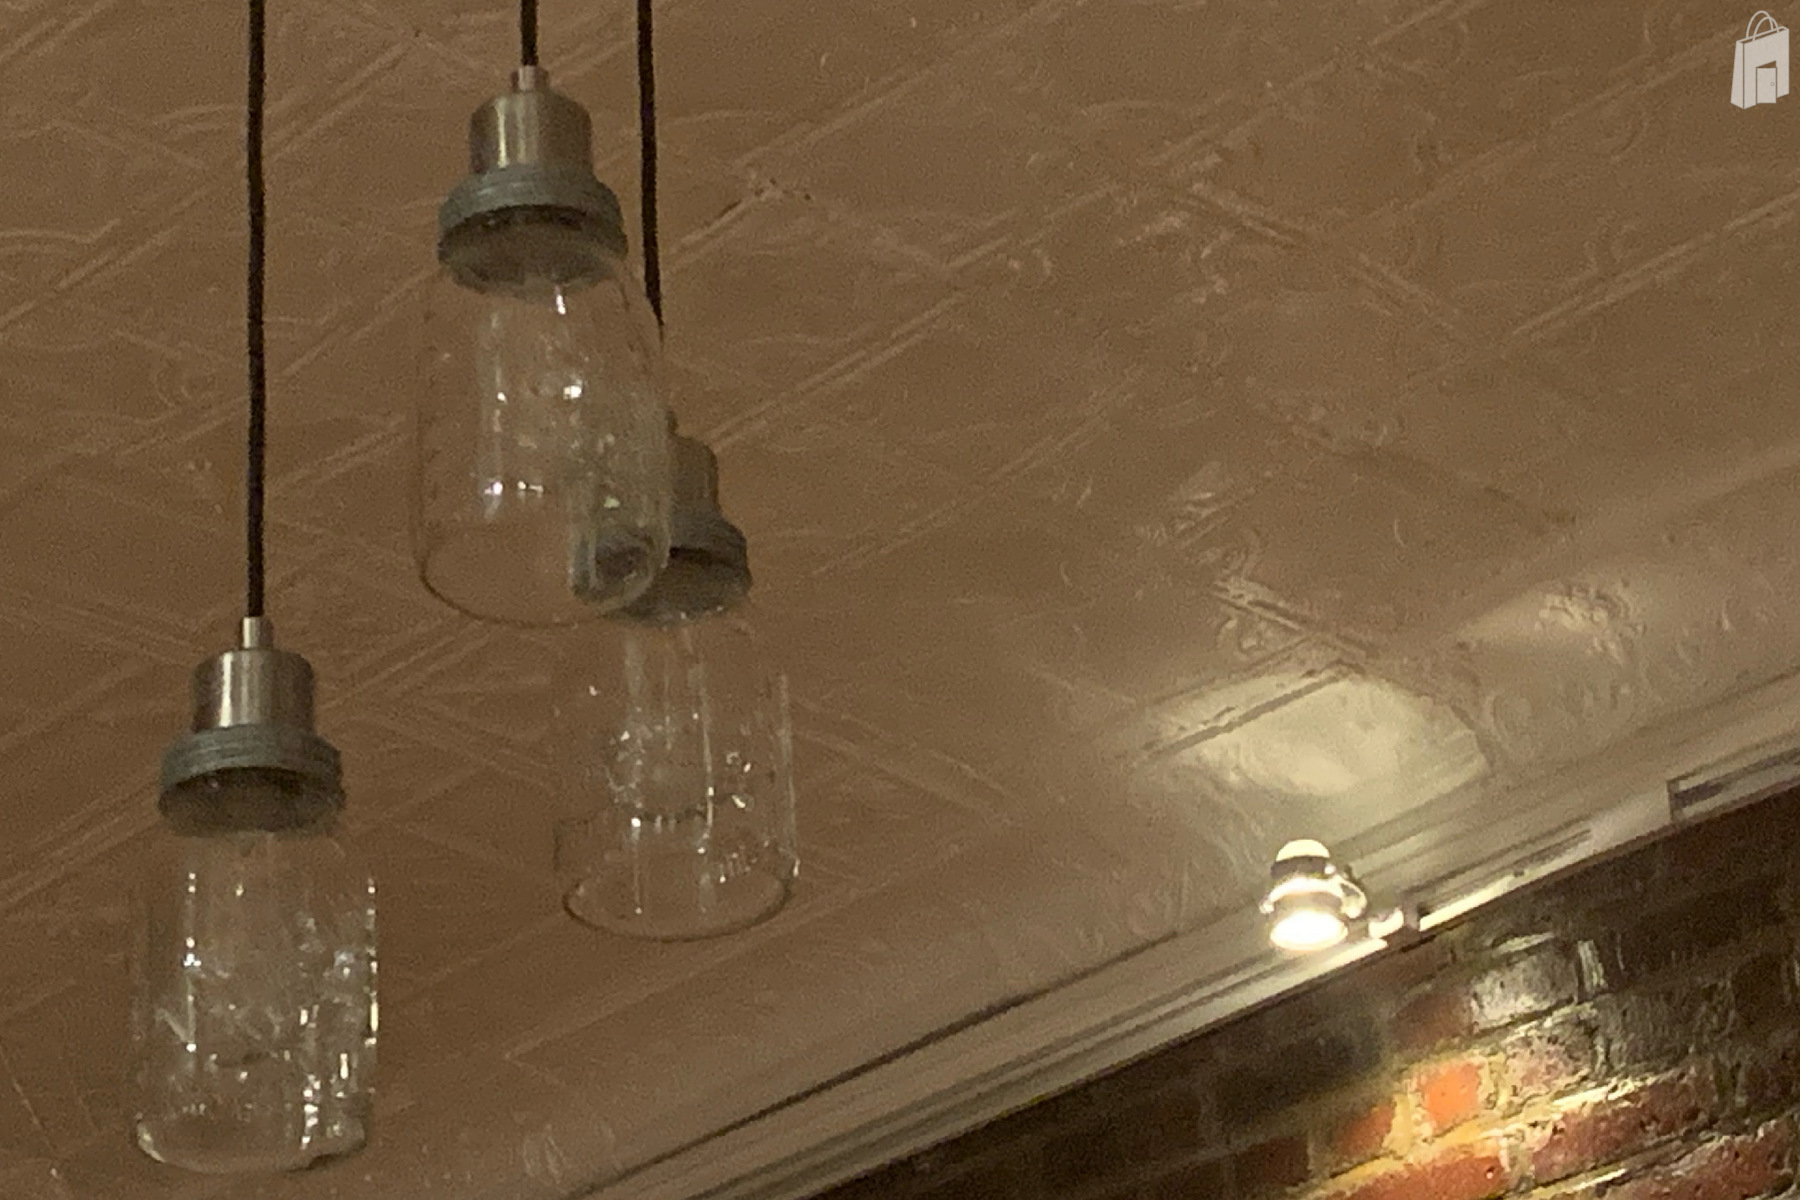 Mason jar pendant lighting with track lights also floating led lights above the 3/4 wallpapered wall